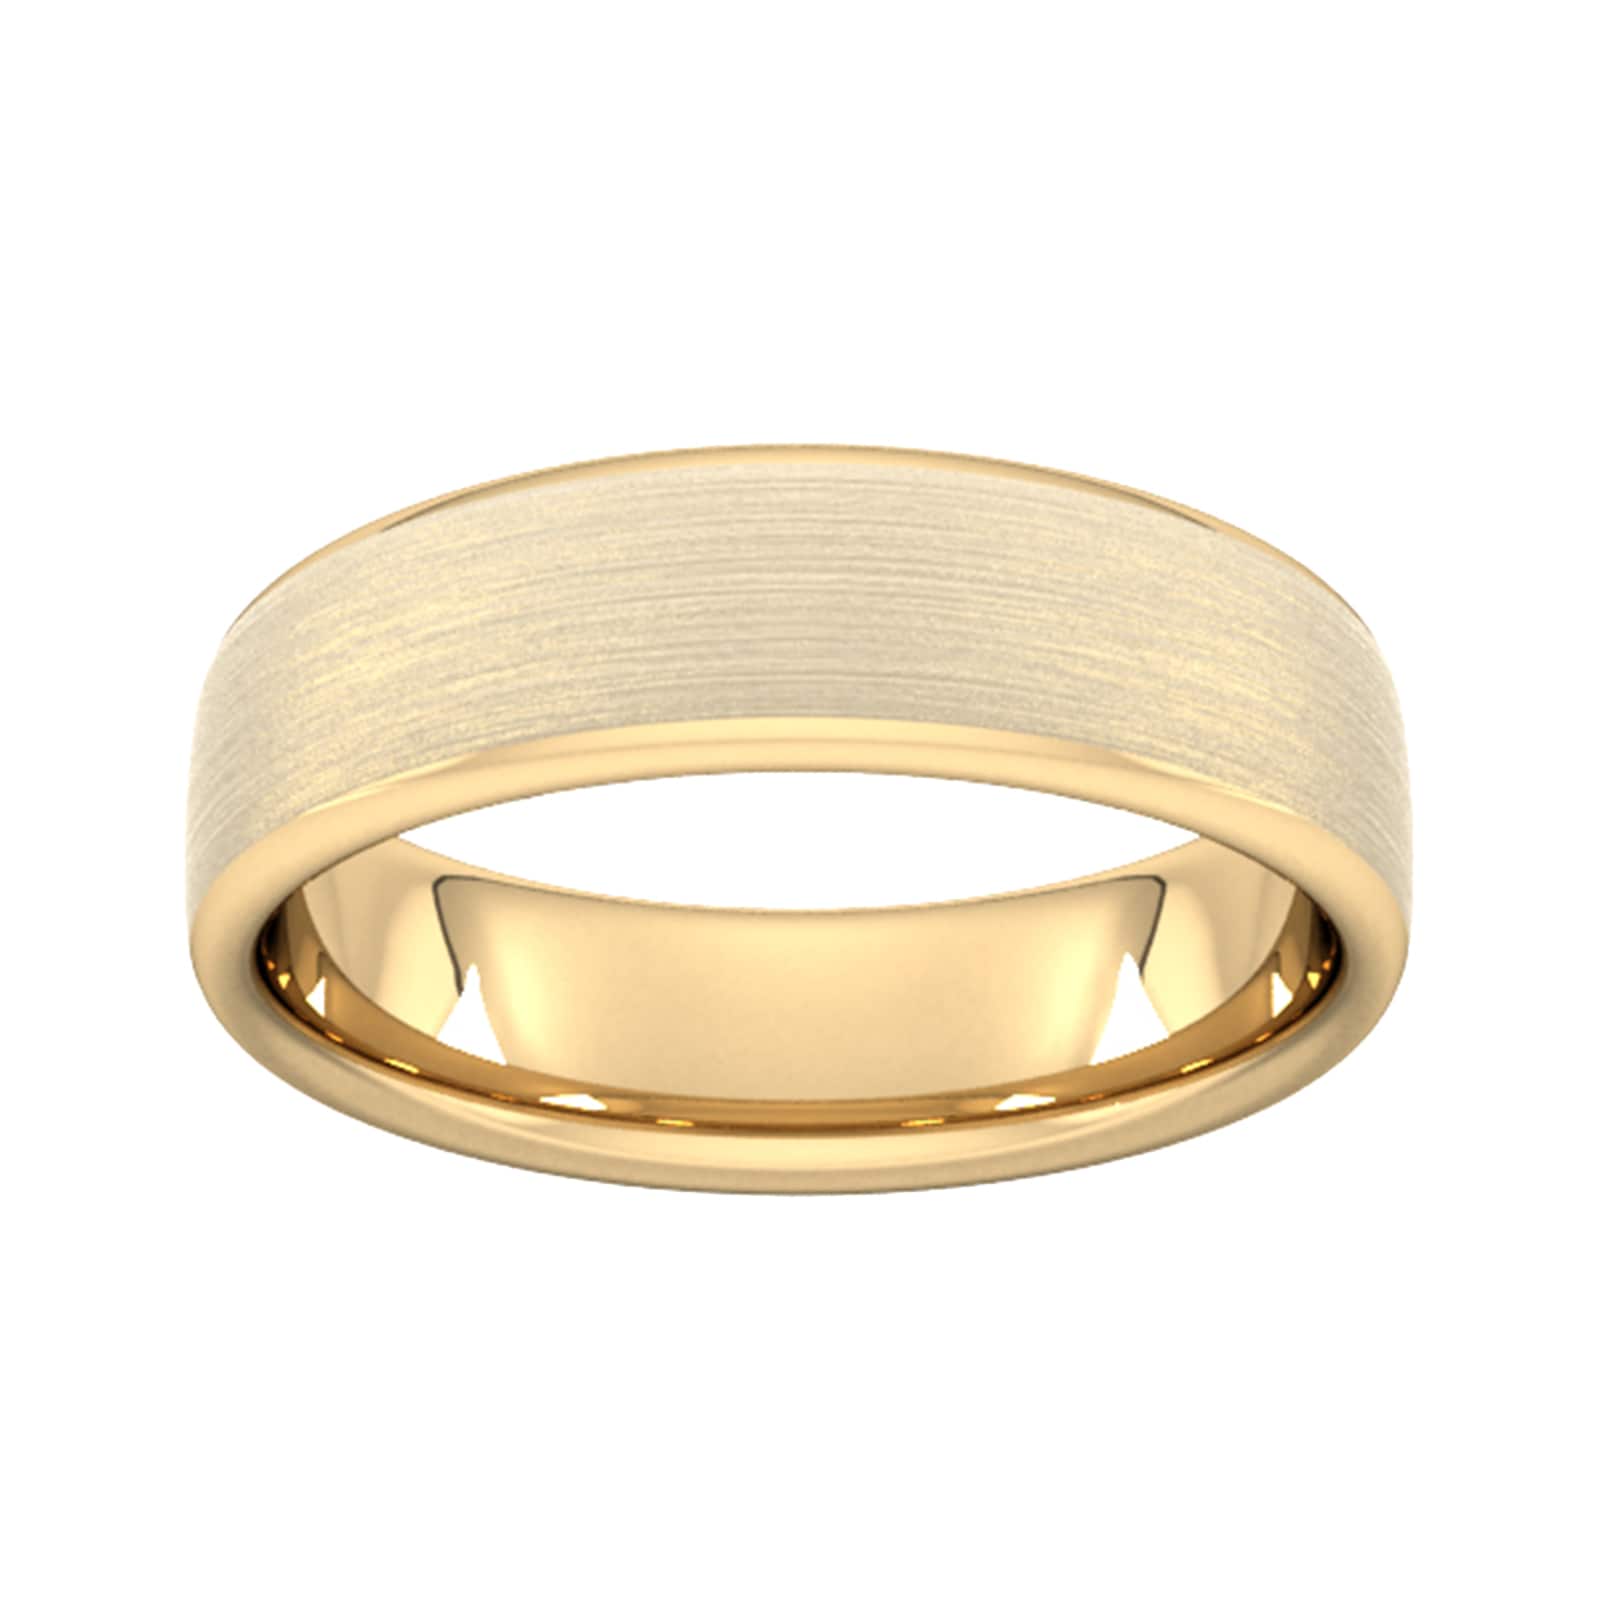 6mm Traditional Court Heavy Matt Finished Wedding Ring In 18 Carat Yellow Gold - Ring Size R